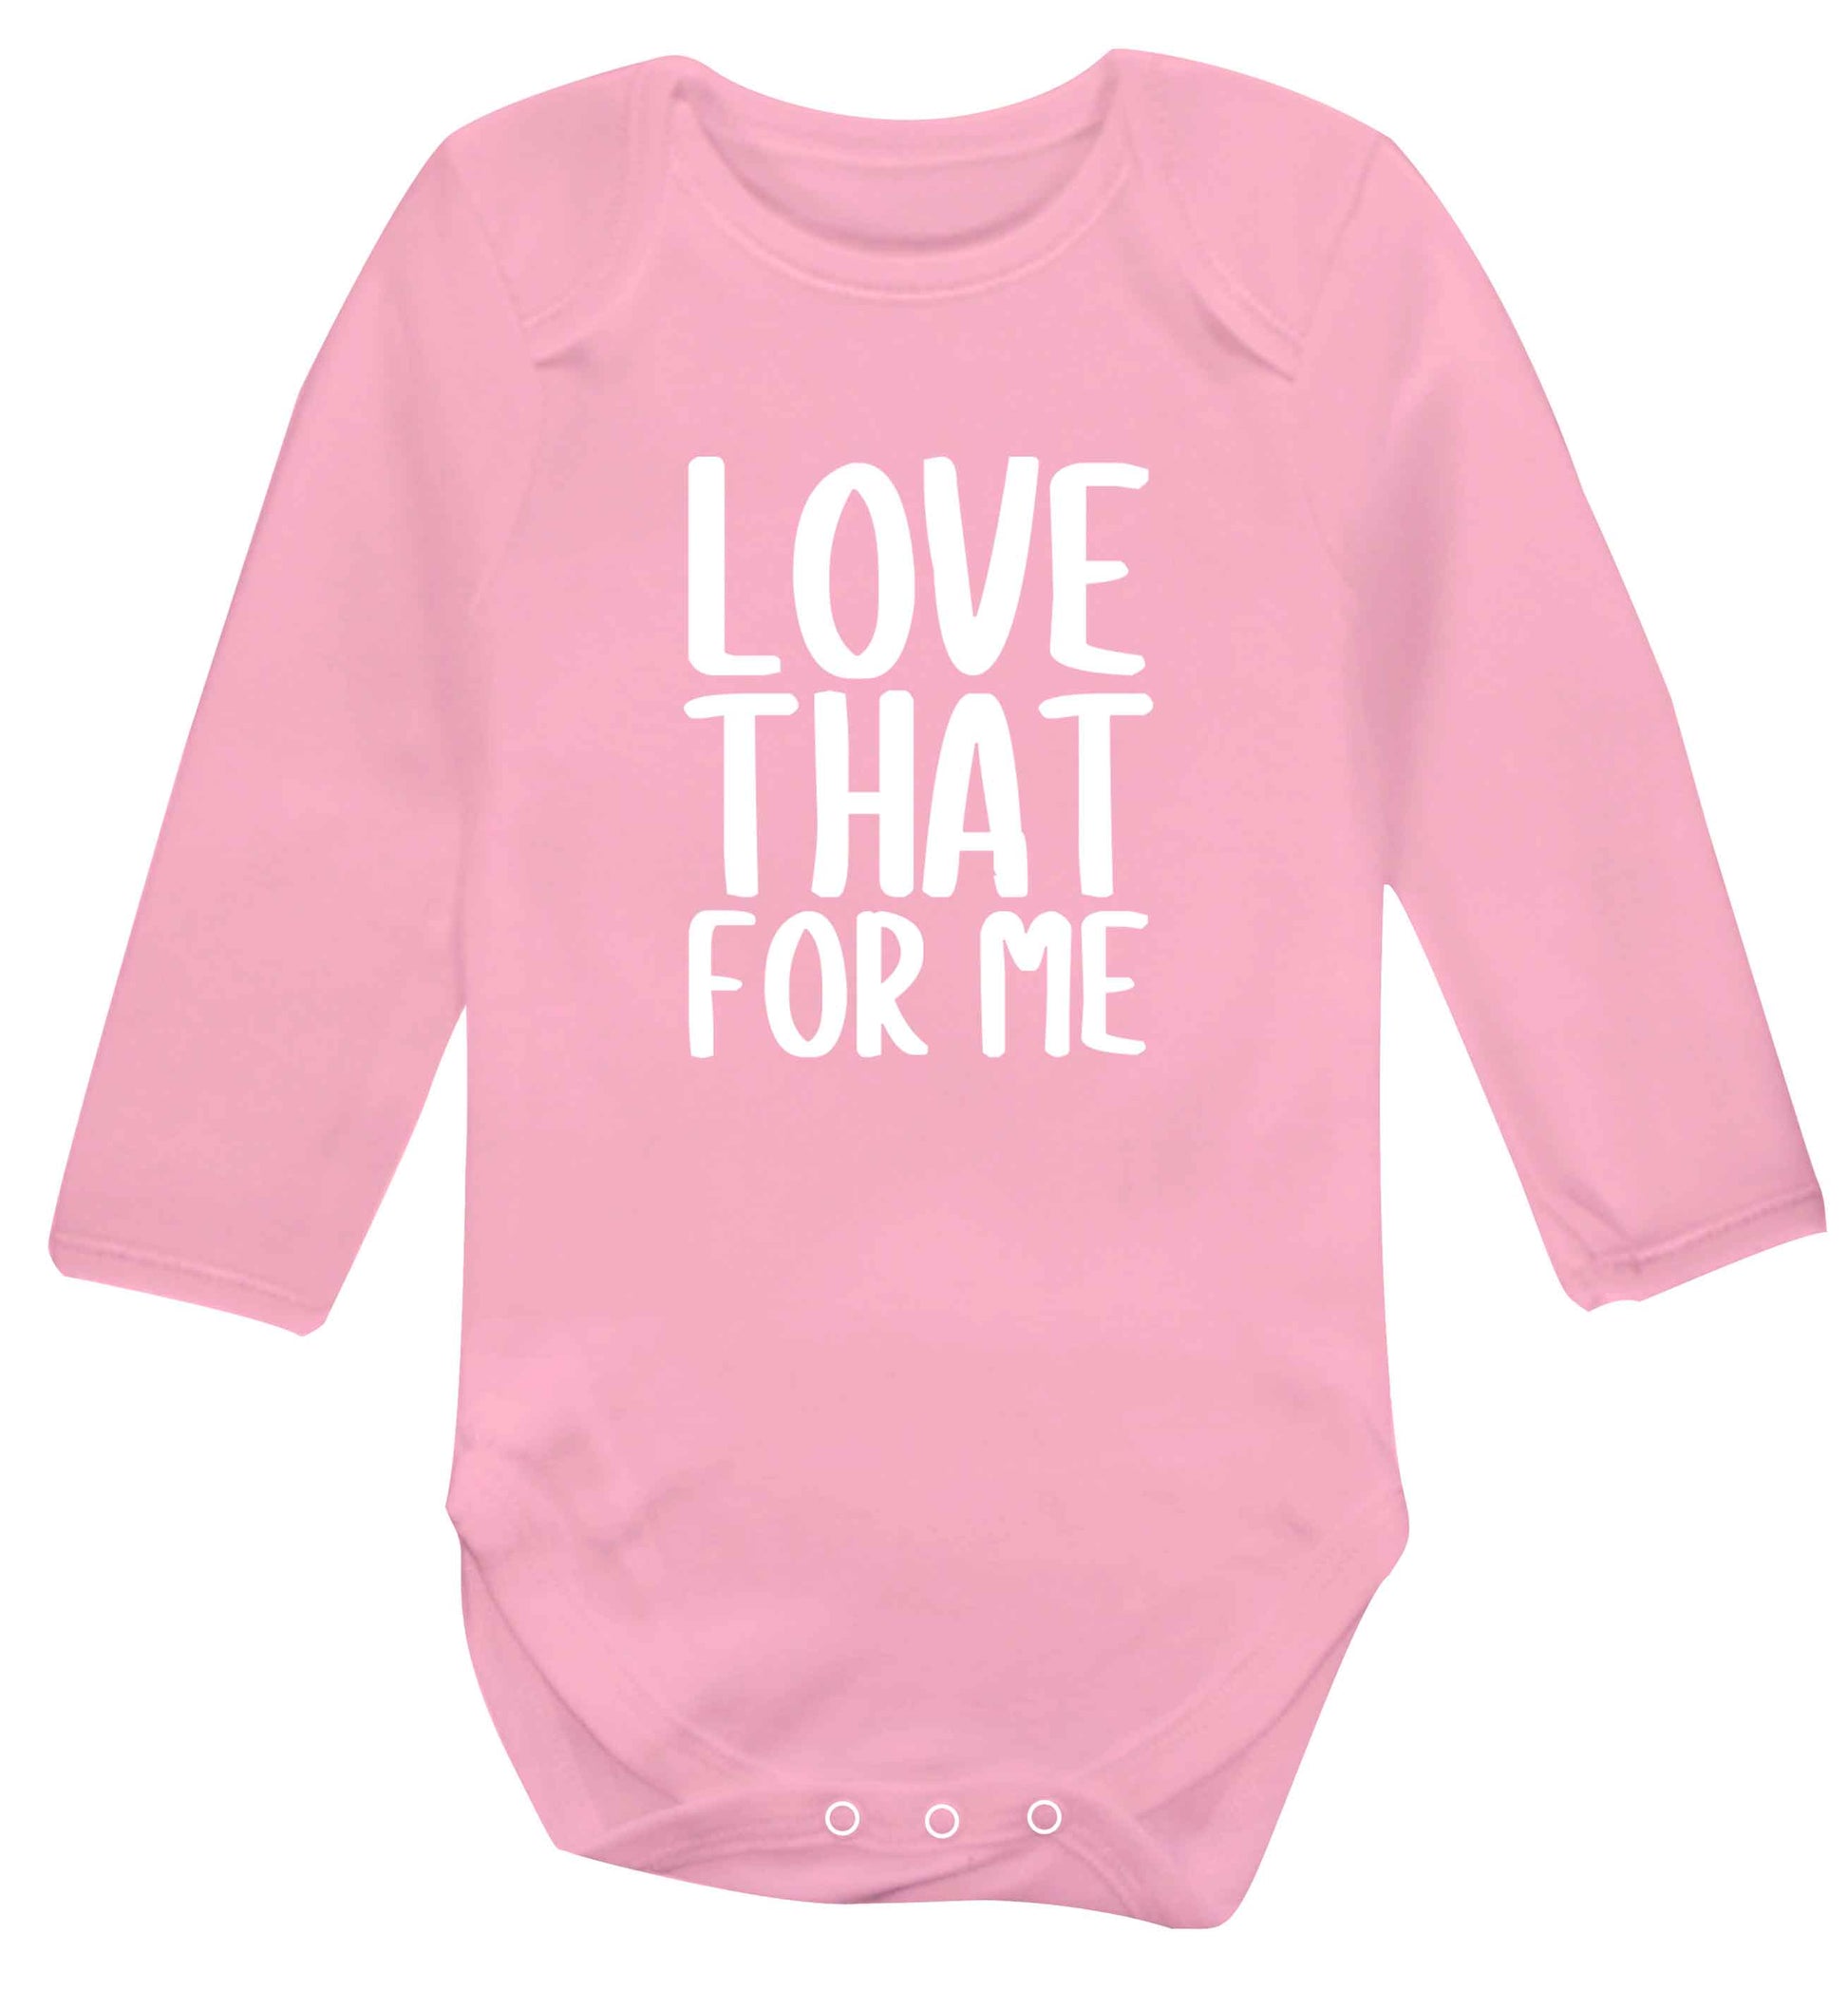 We love this for YOU! Who else loves saying this?!  baby vest long sleeved pale pink 6-12 months